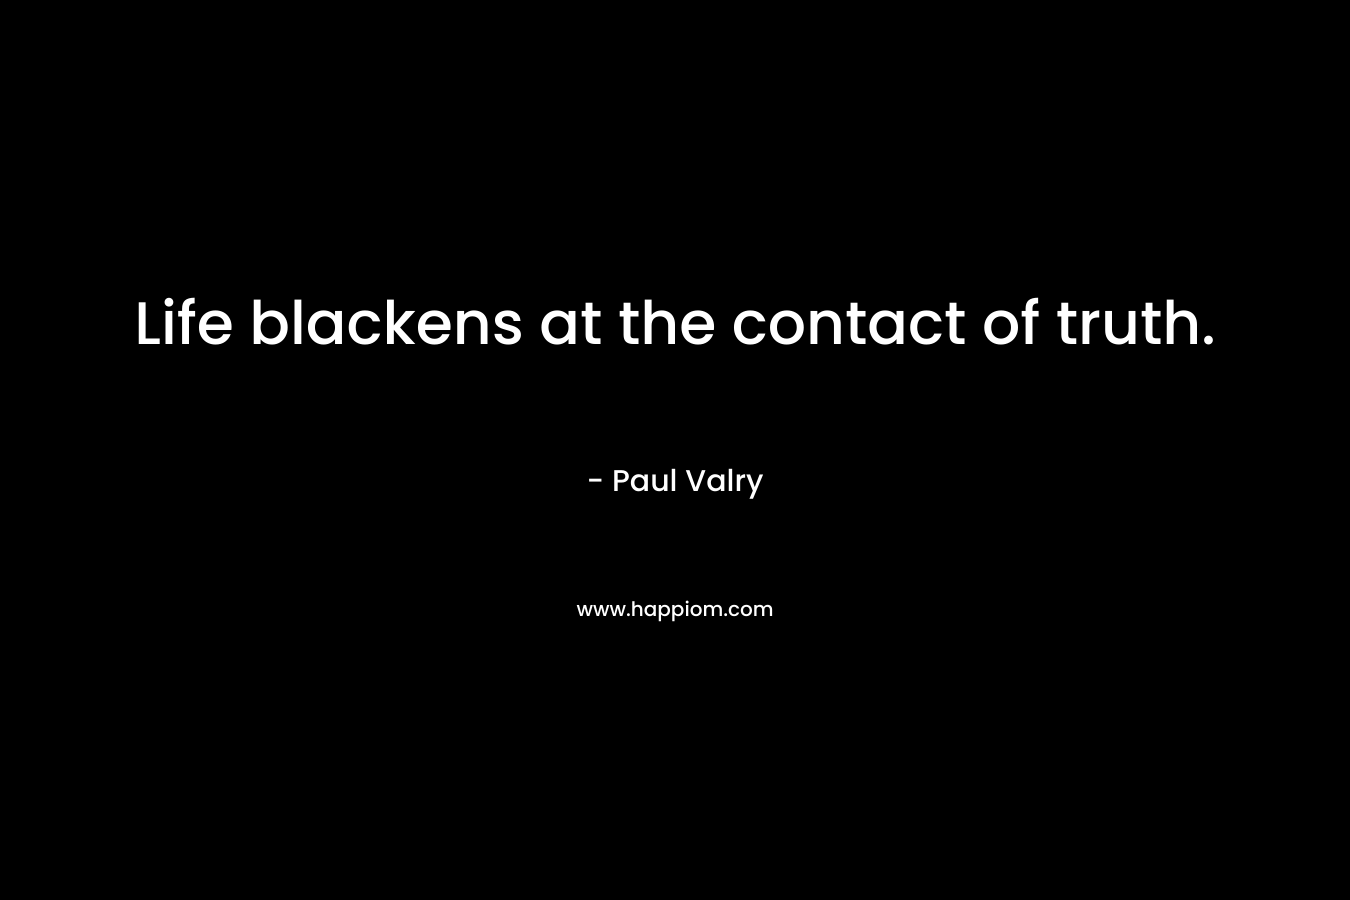 Life blackens at the contact of truth. – Paul Valry